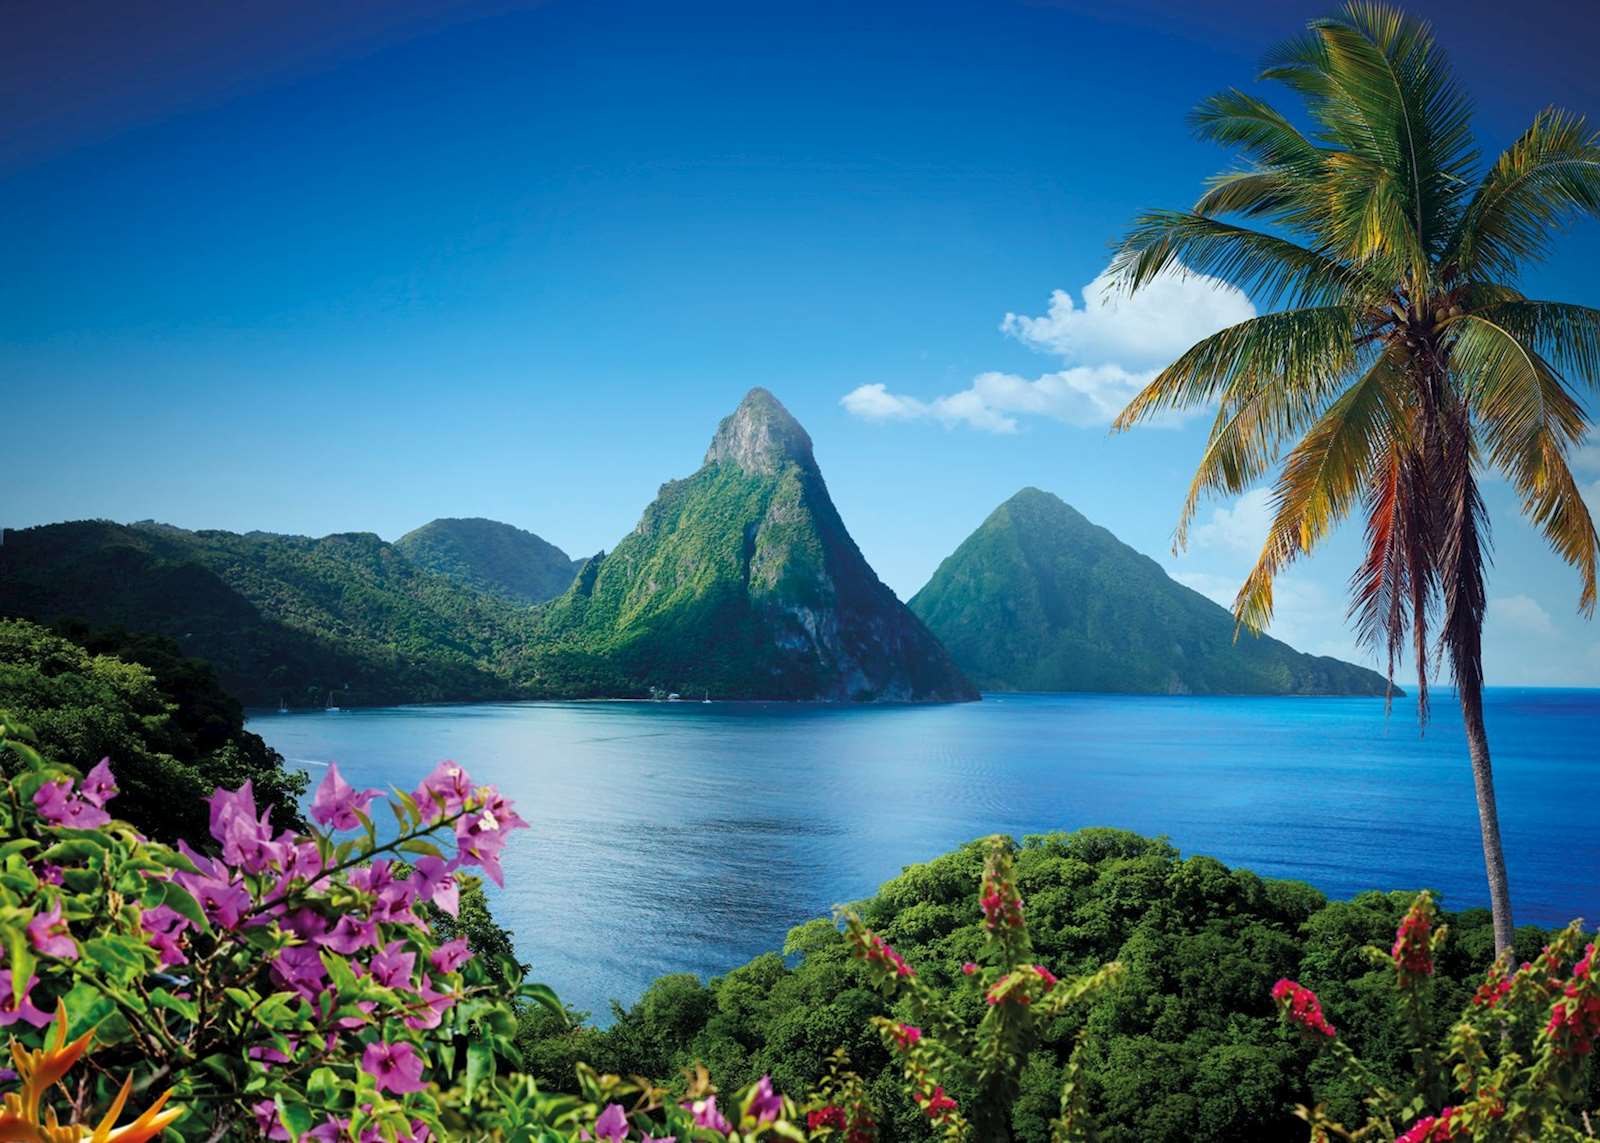 p&o excursions st lucia